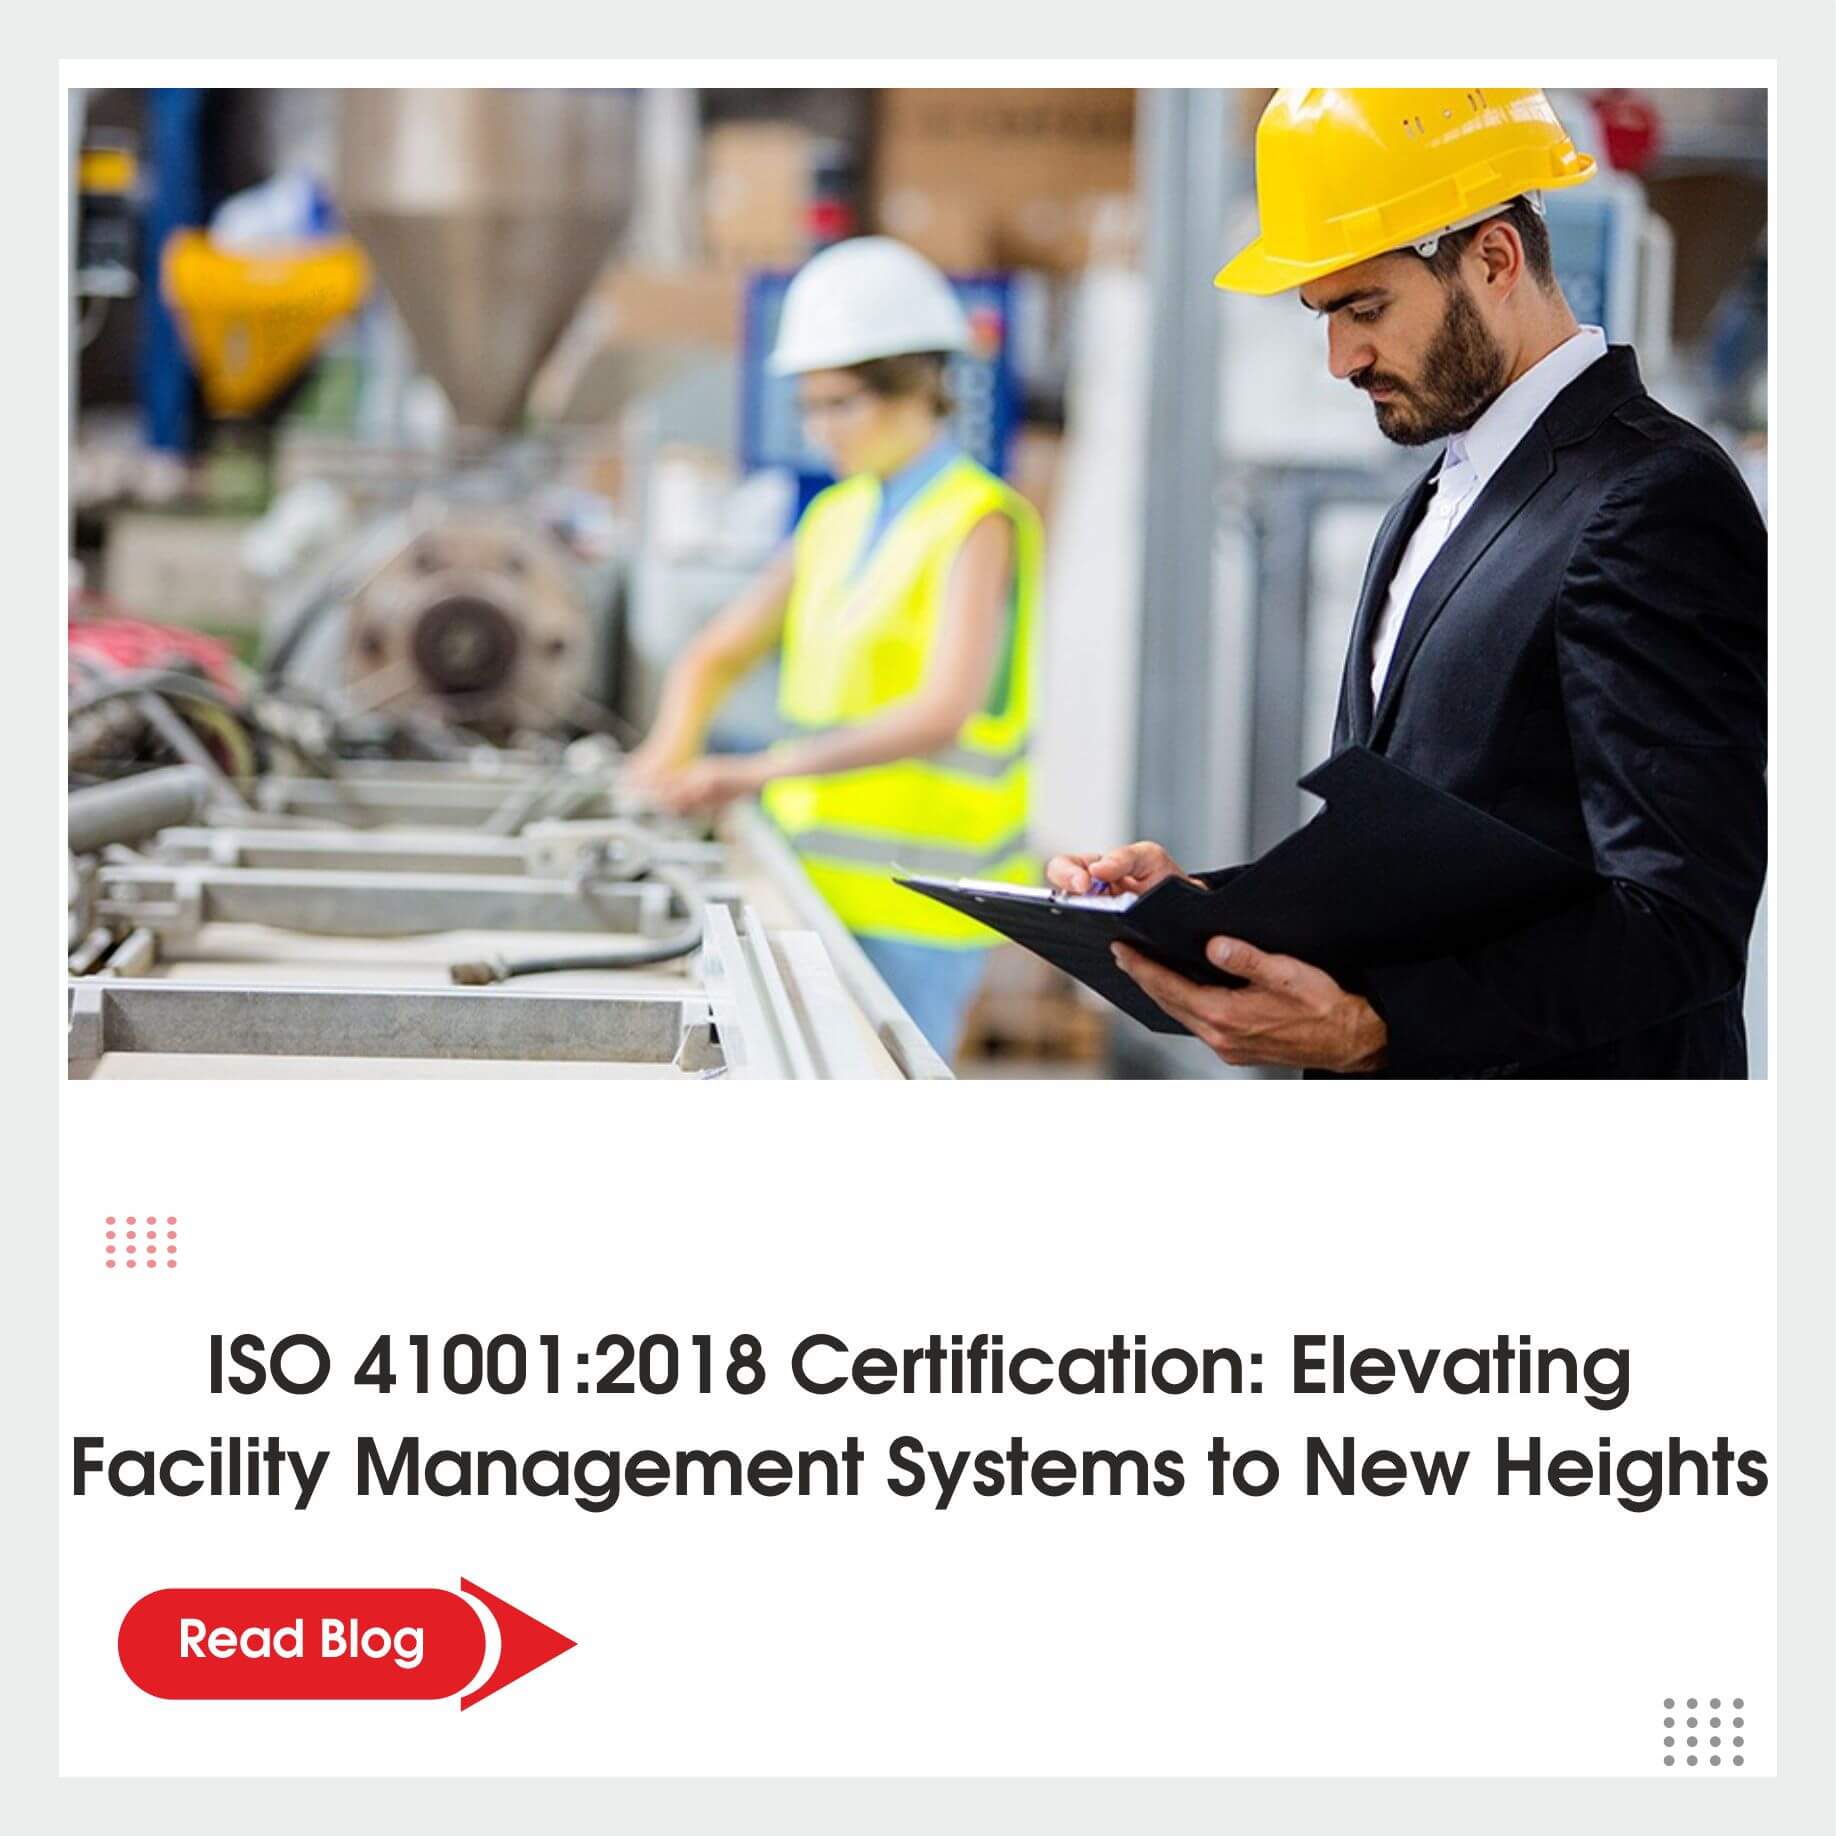 ISO 41001:2018 Certification: Elevating Facility Management Systems to New Heights